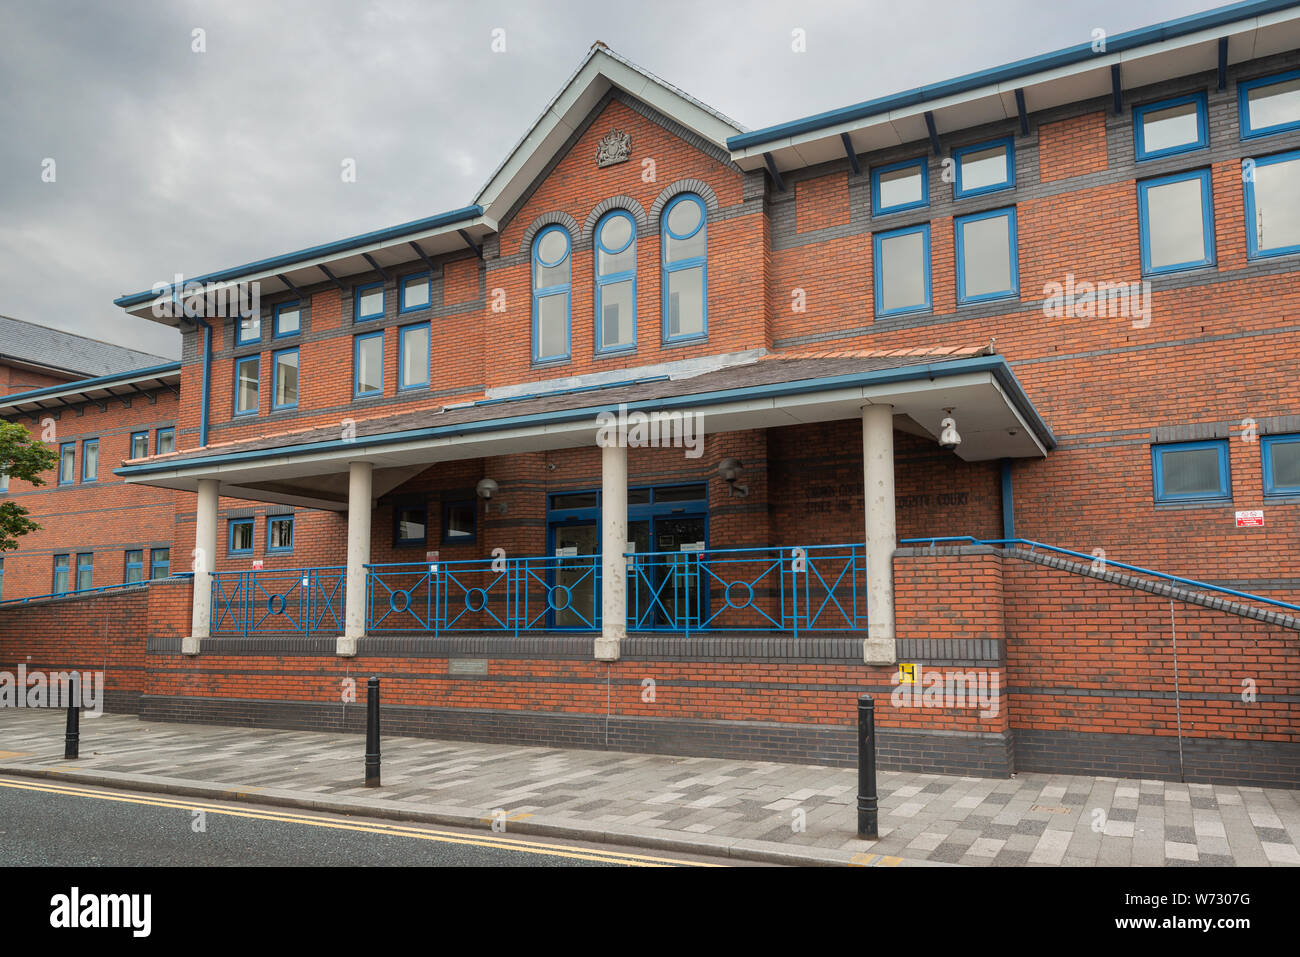 The Combined Court Centre located on Bethesda Street in Stoke-on-Trent. Stock Photo